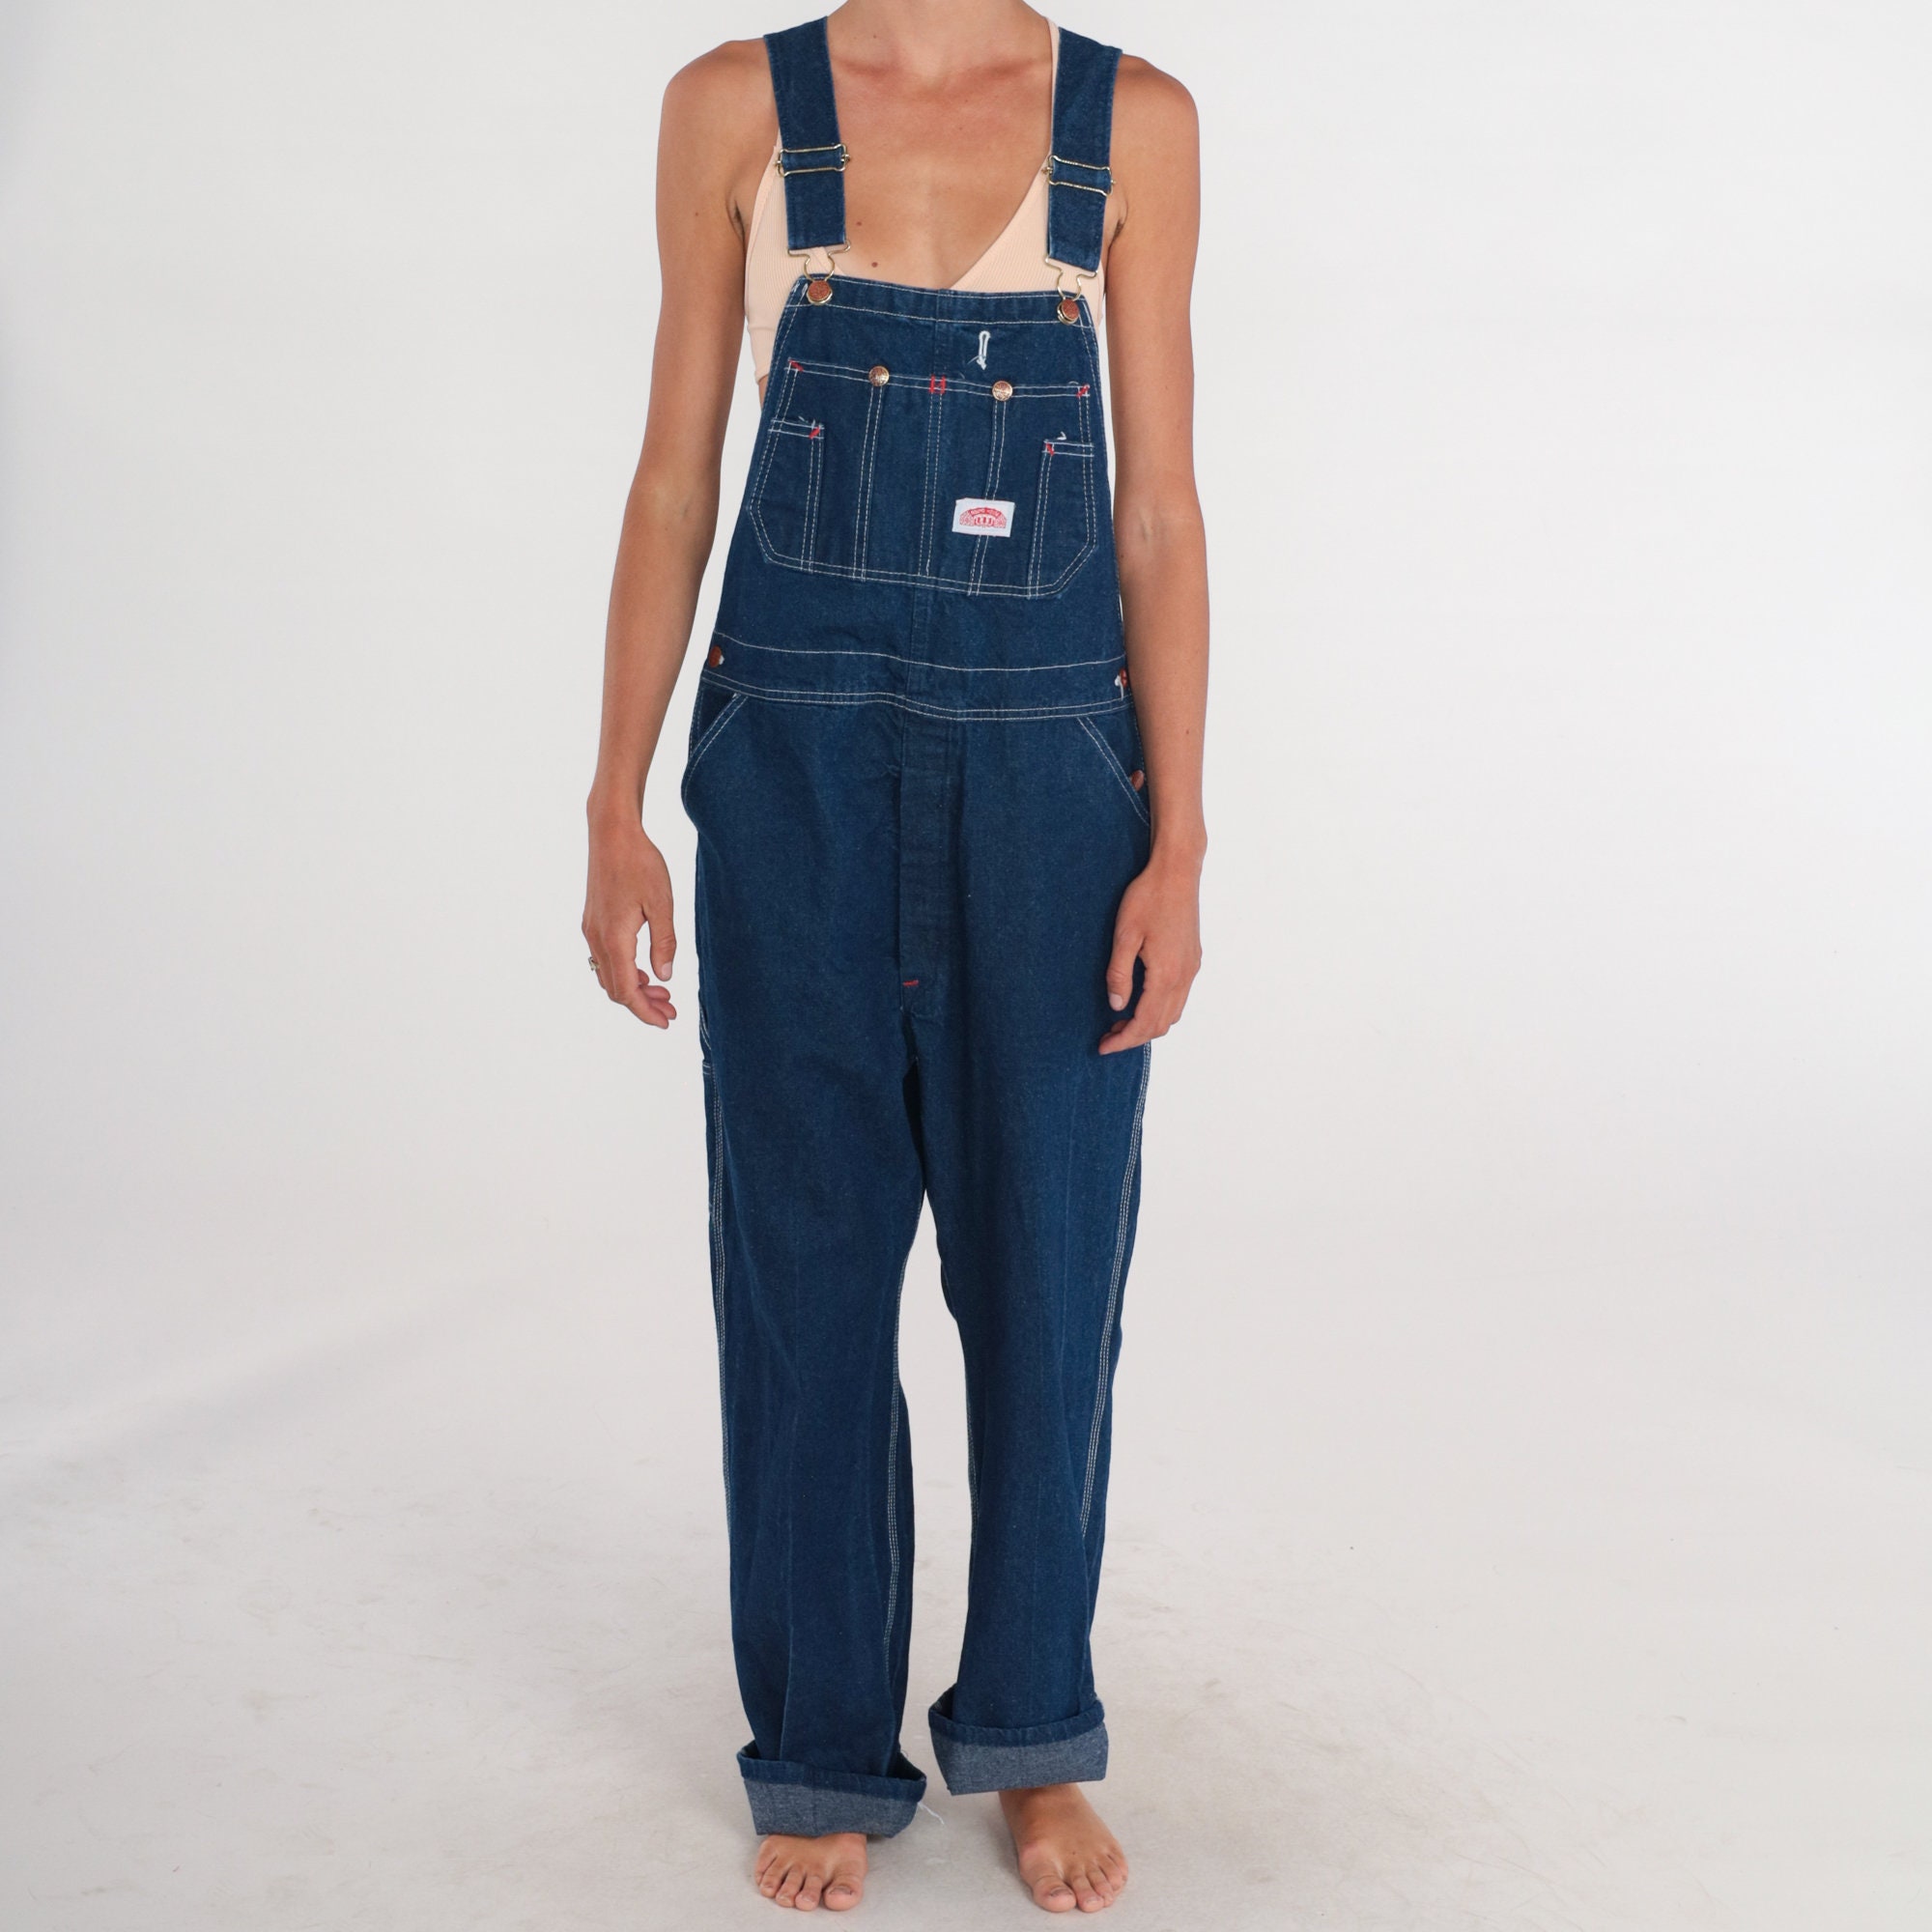 Denim Overalls Y2k Blue Jean Bib Overall Pants Roundhouse Baggy ...